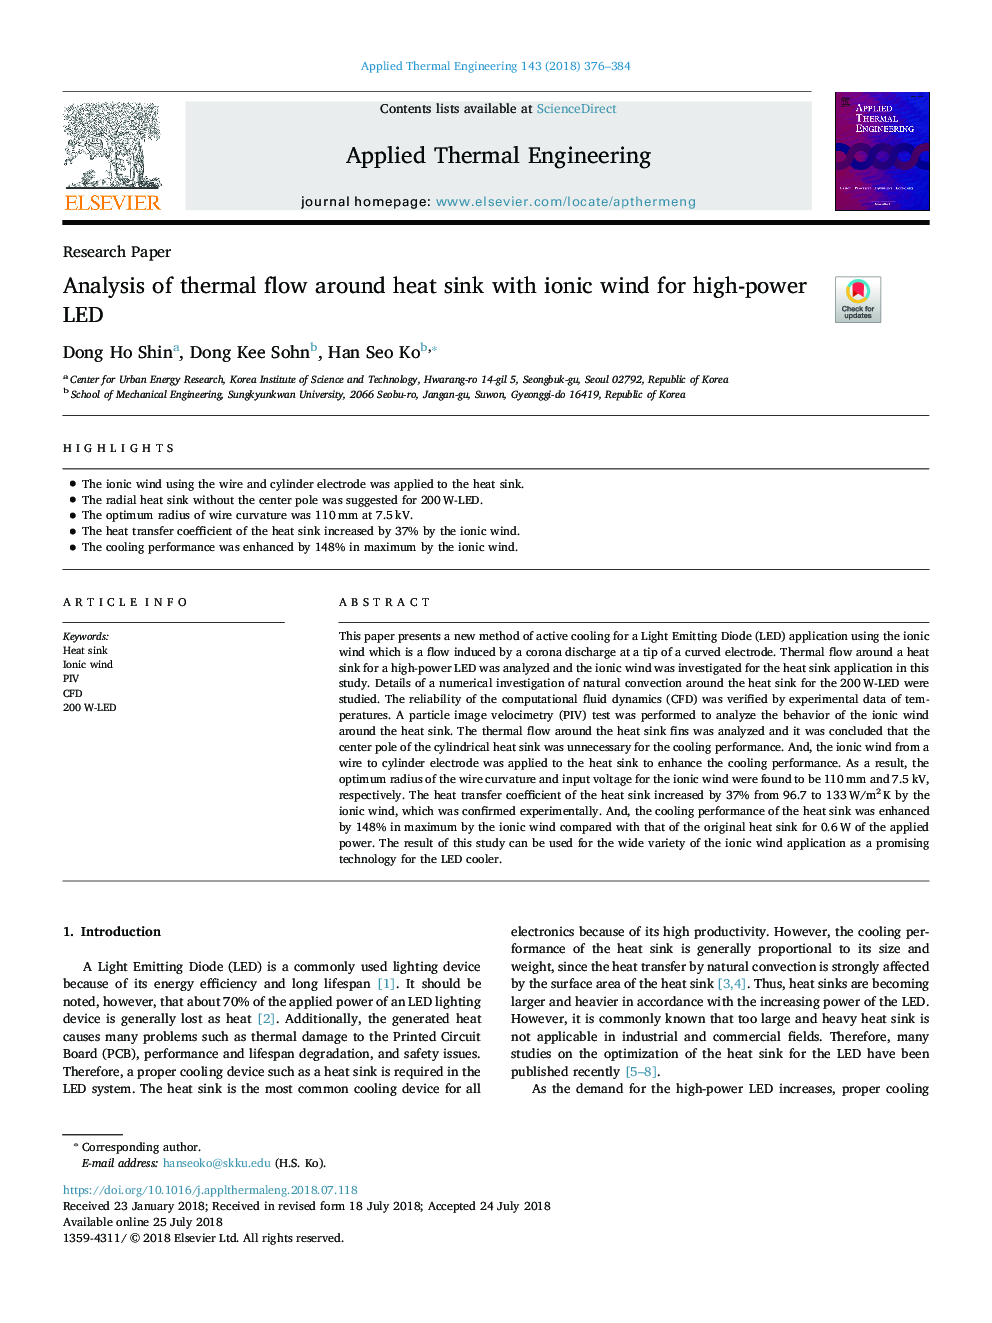 Analysis of thermal flow around heat sink with ionic wind for high-power LED